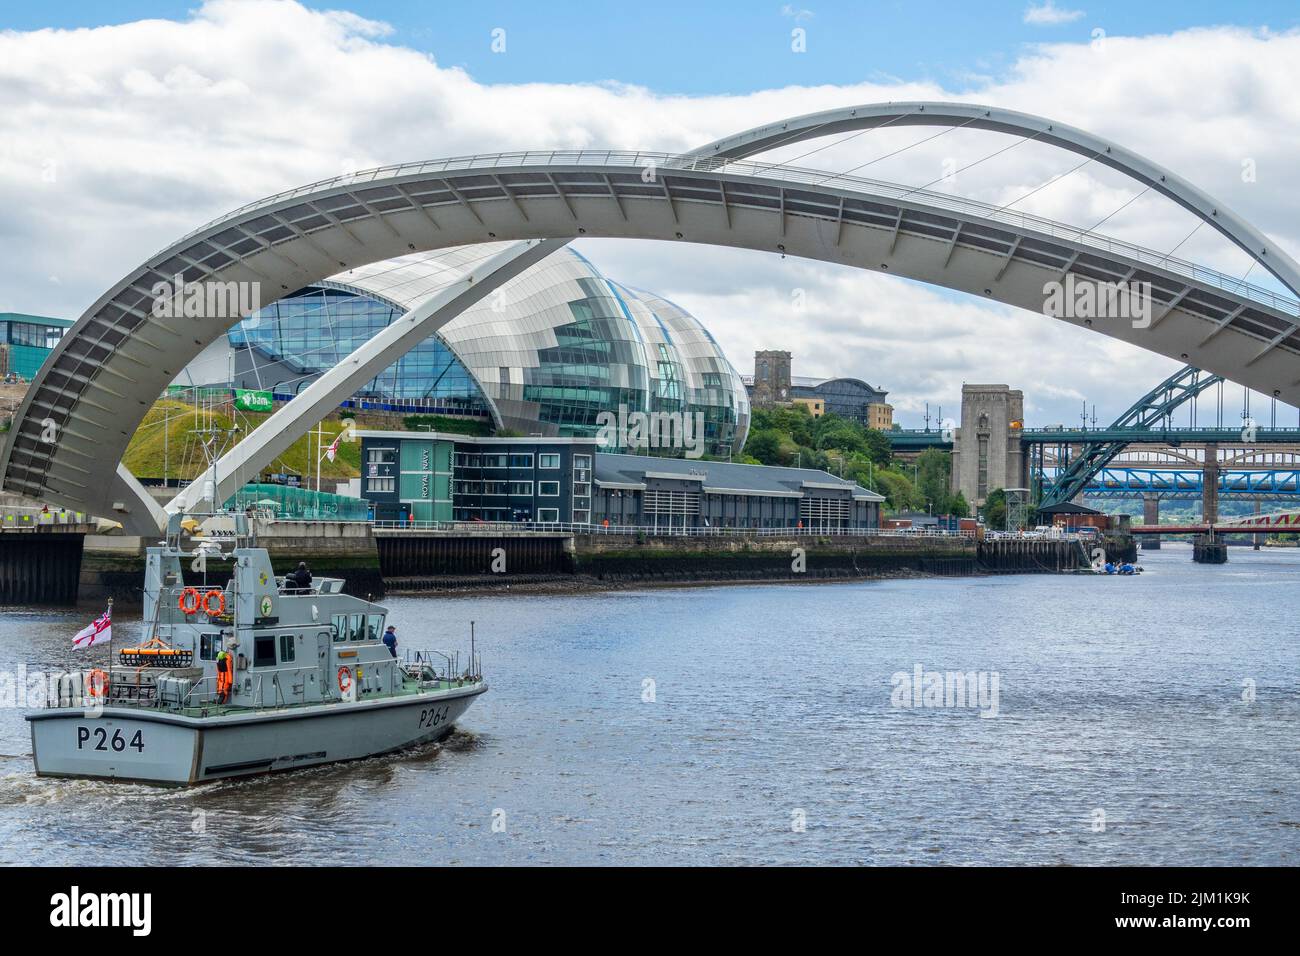 HMS Archer P264 patrol boat used by the Royal Navy as a University Royal Naval Unity URNU training ship. Seen on the River Tyne, Newcastle, UK. Stock Photo